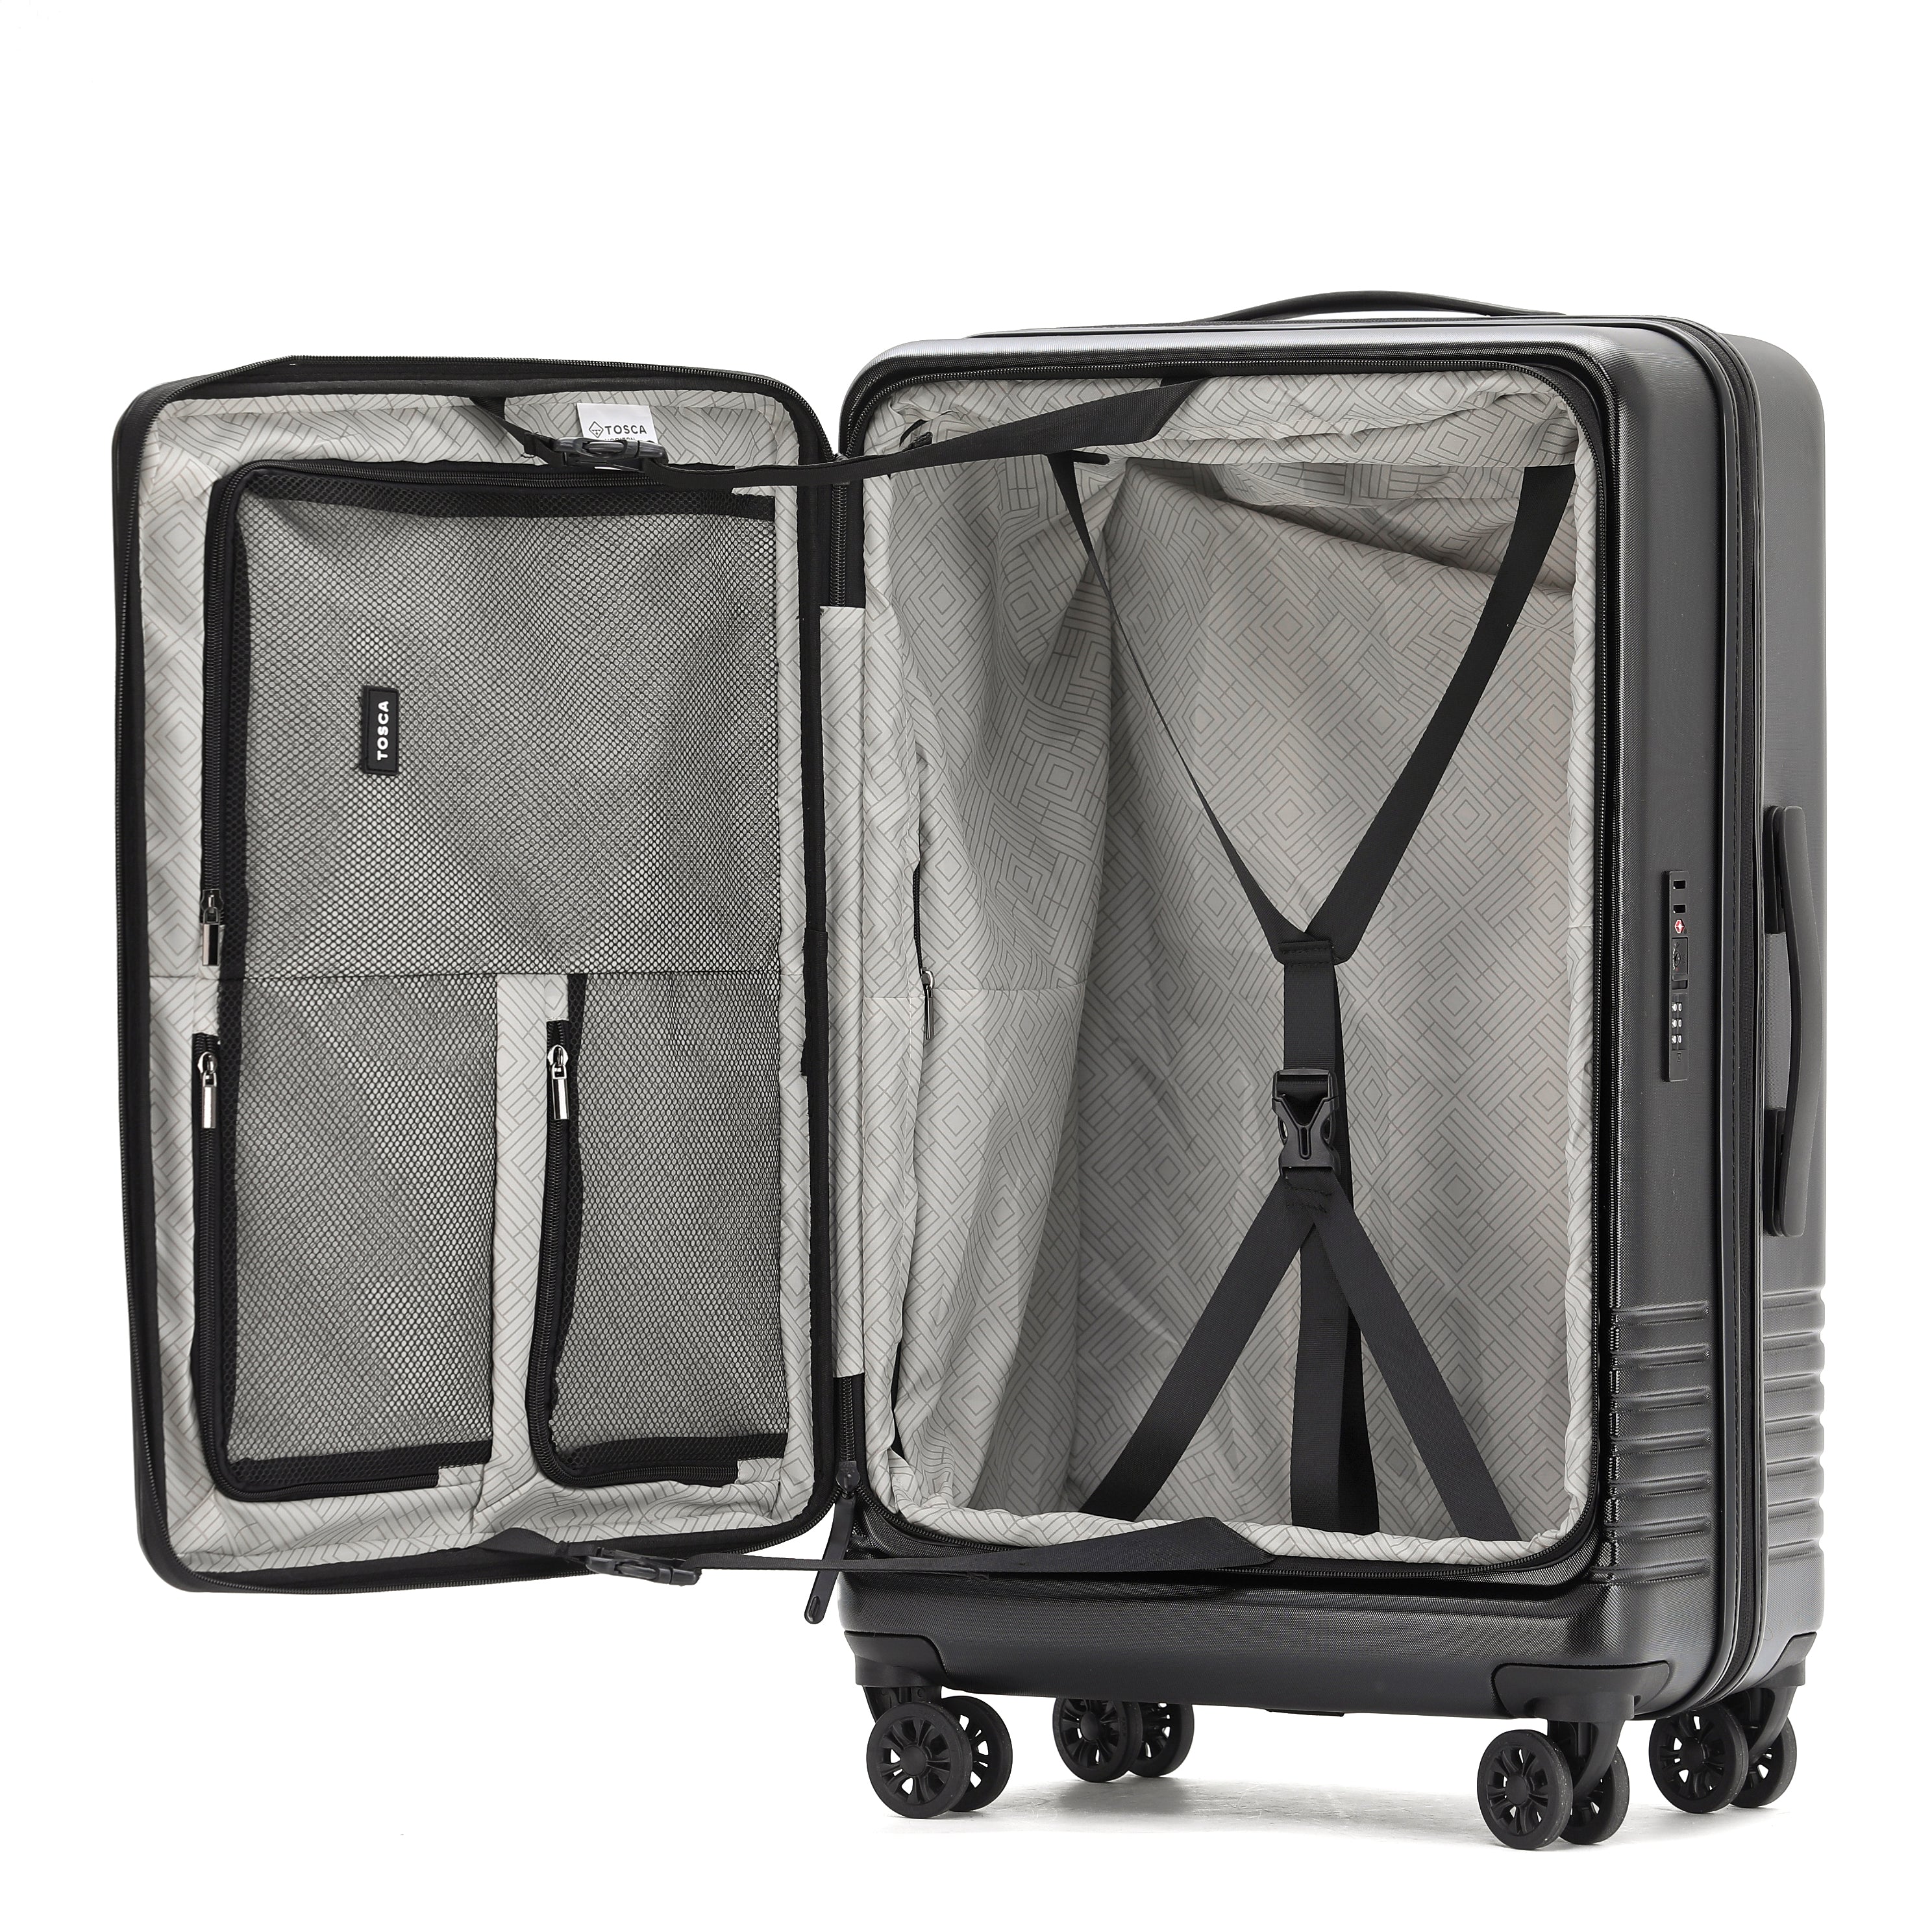 Tosca - TCA644 Horizon Front lid opening Set of 3 suitcases - Black-10